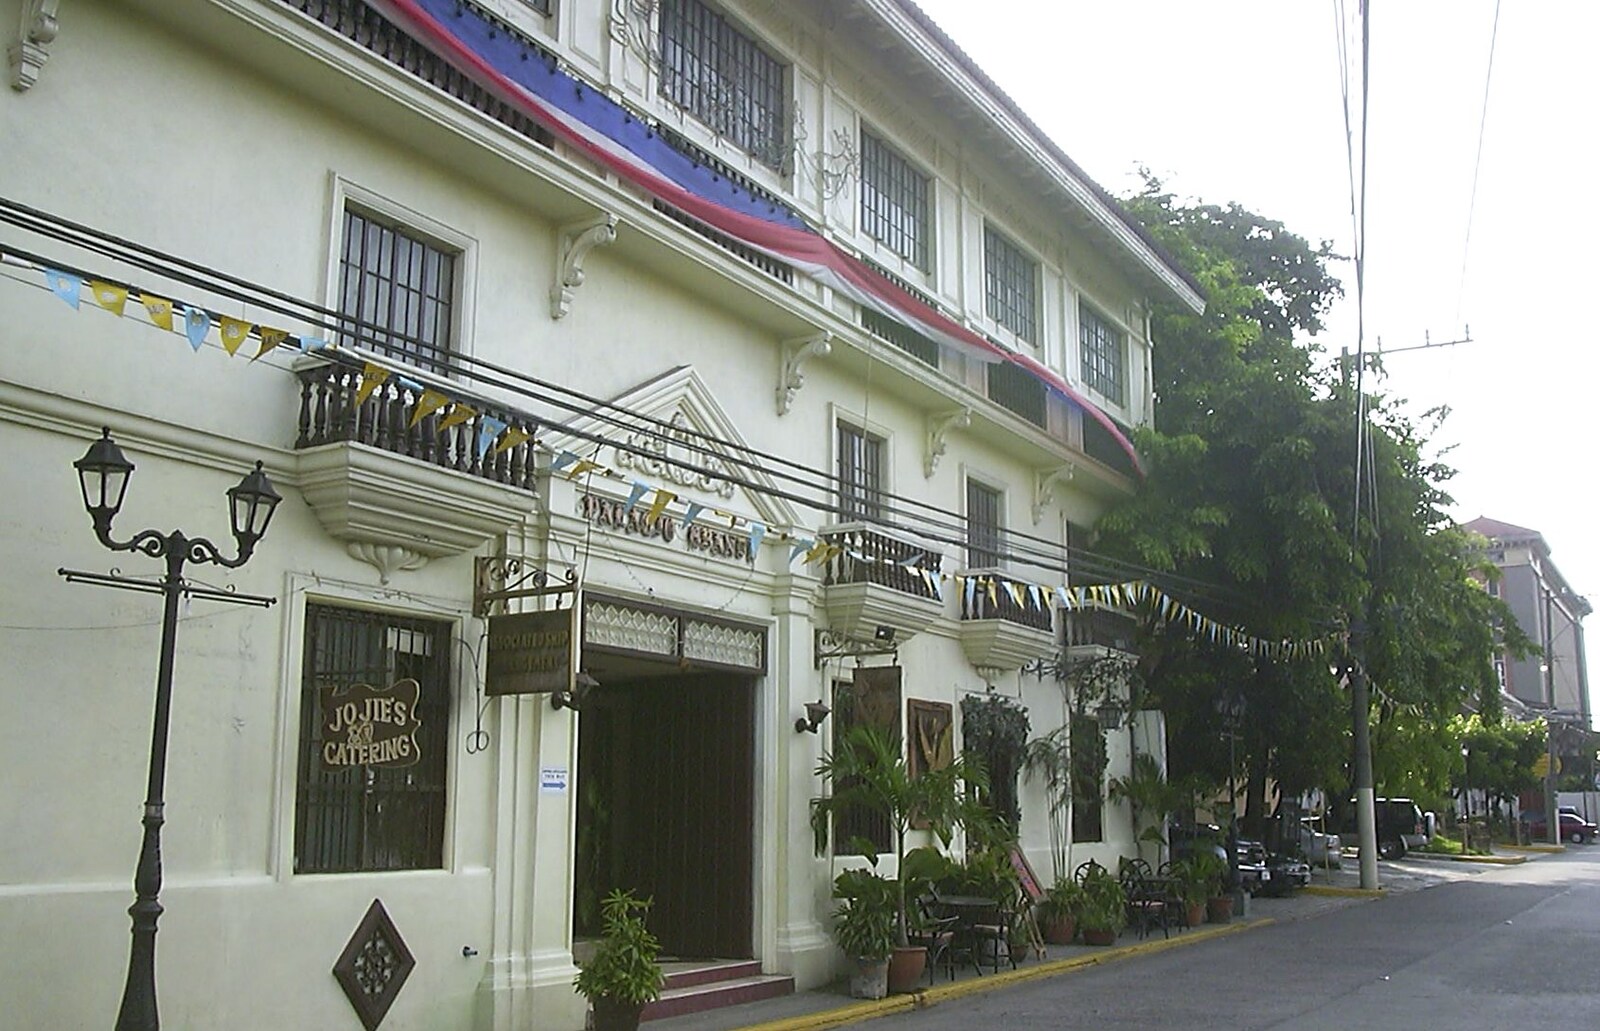 A building wrapped in bunting from A Postcard From Manila: a Working Trip, Philippines - 9th July 2004